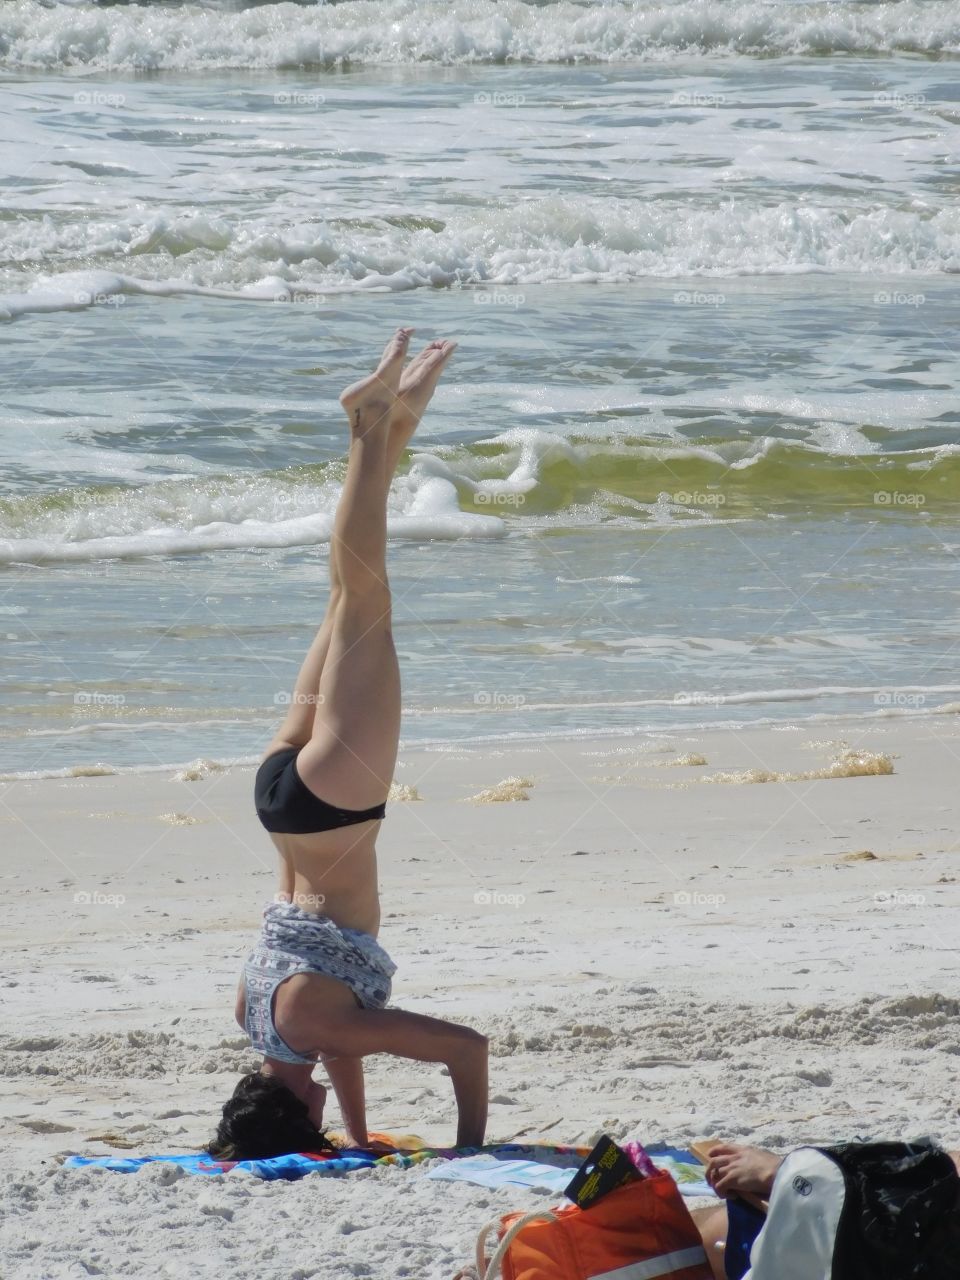 Mesmerizing Yoga on the beach in front of the Gulf of Mexico!